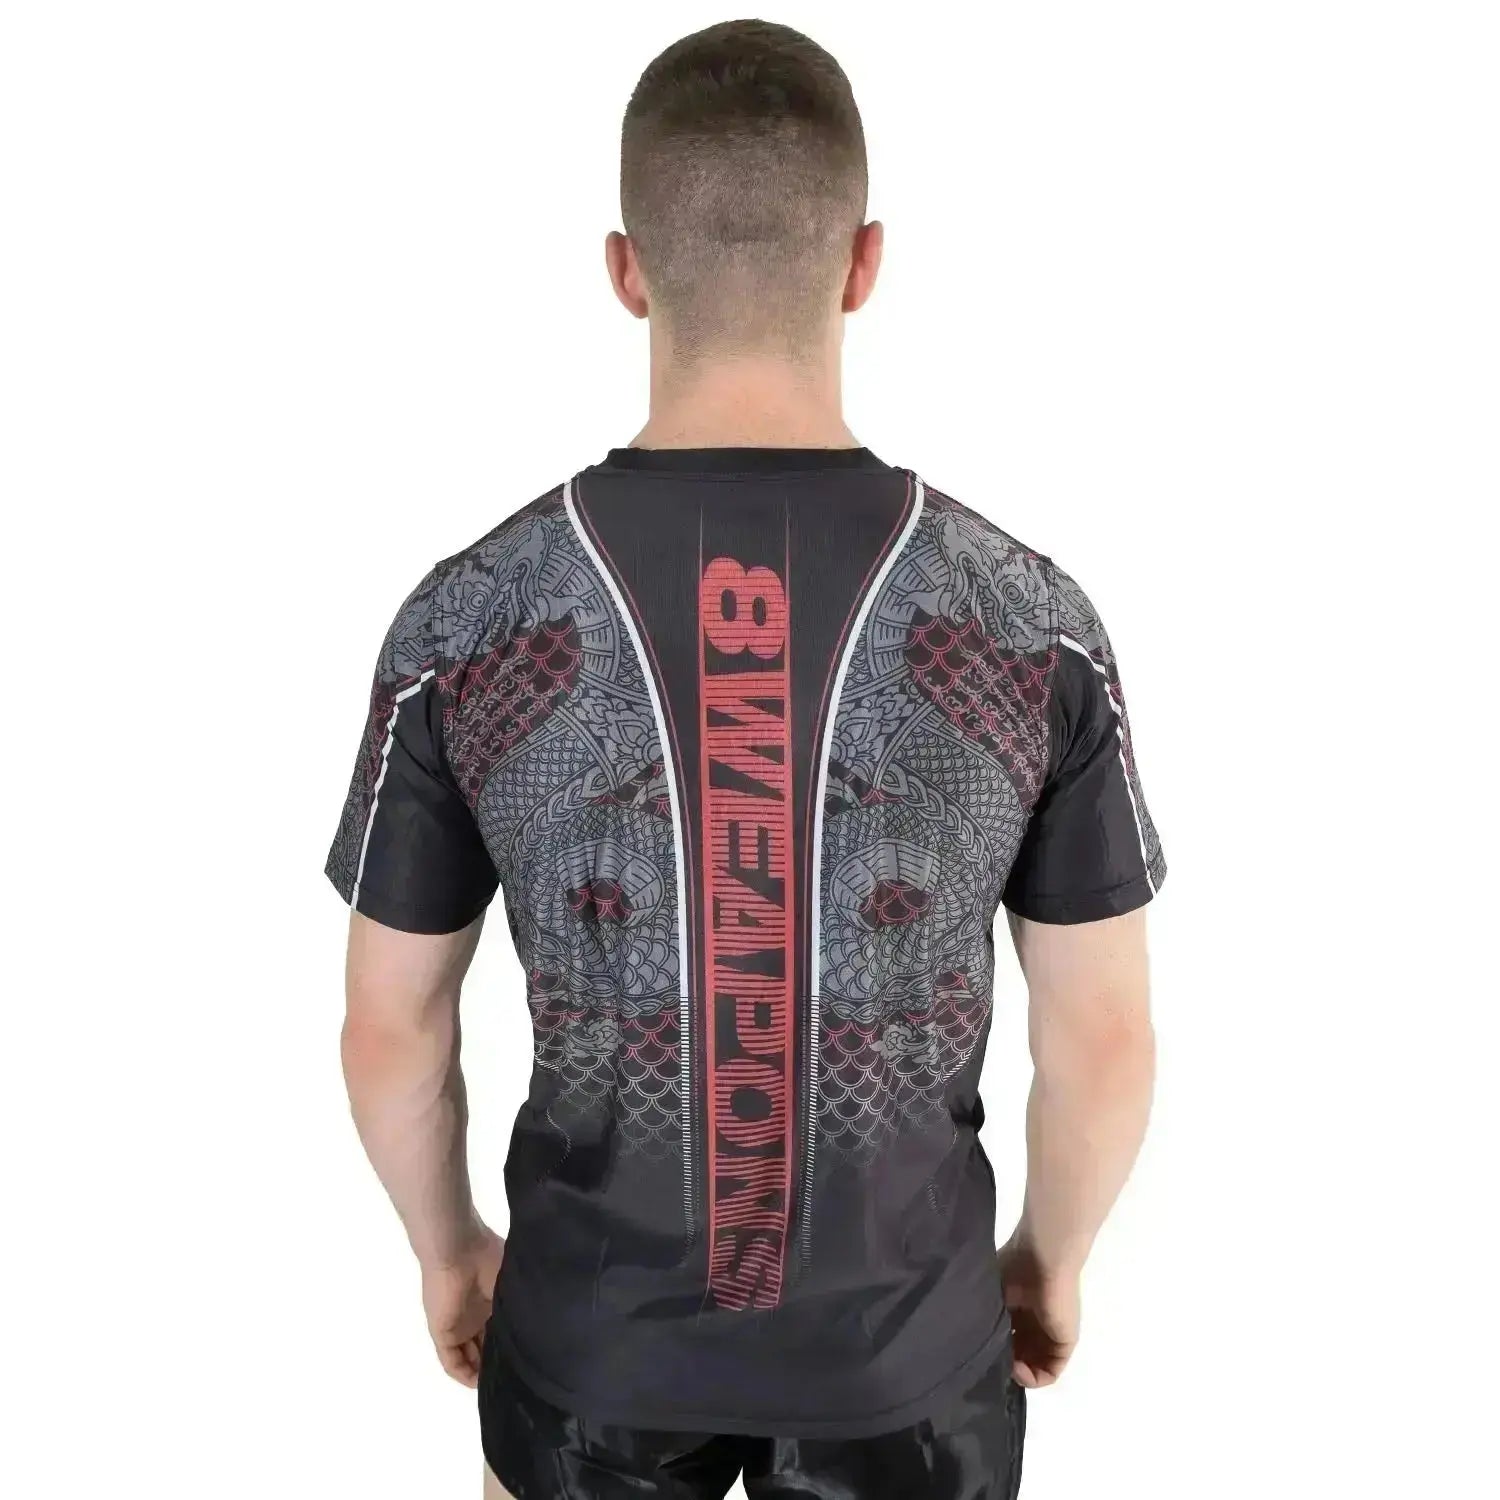 8 WEAPONS Functional T-Shirt - Naga Yant - Fight Co